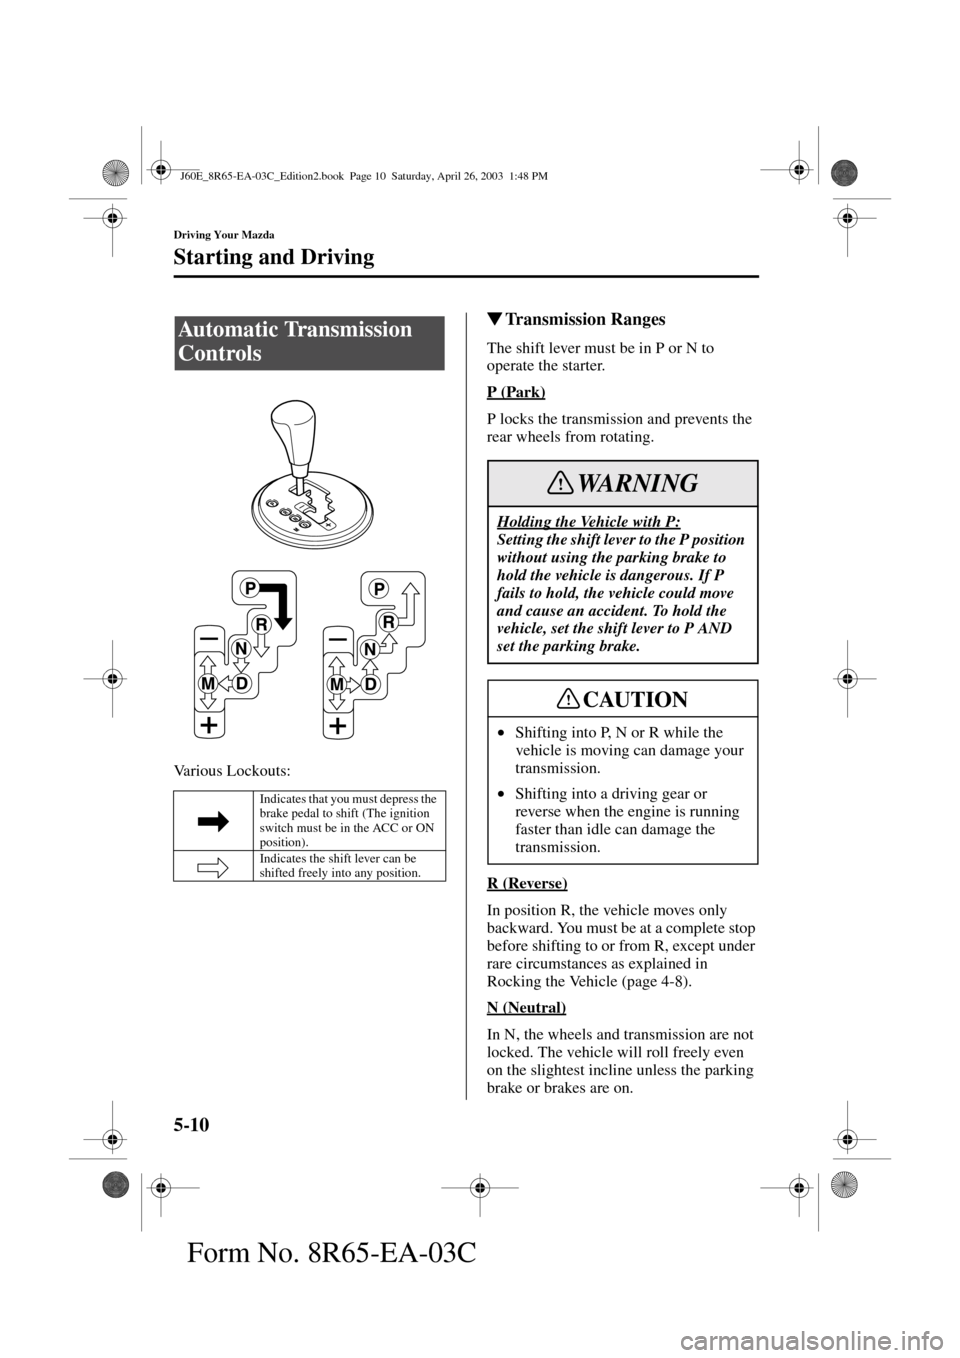 MAZDA MODEL RX 8 2004  Owners Manual (in English) 5-10
Driving Your Mazda
Starting and Driving
Form No. 8R65-EA-03C
Various Lockouts:
Transmission Ranges
The shift lever must be in P or N to 
operate the starter.
P (Park)
P locks the transmission an